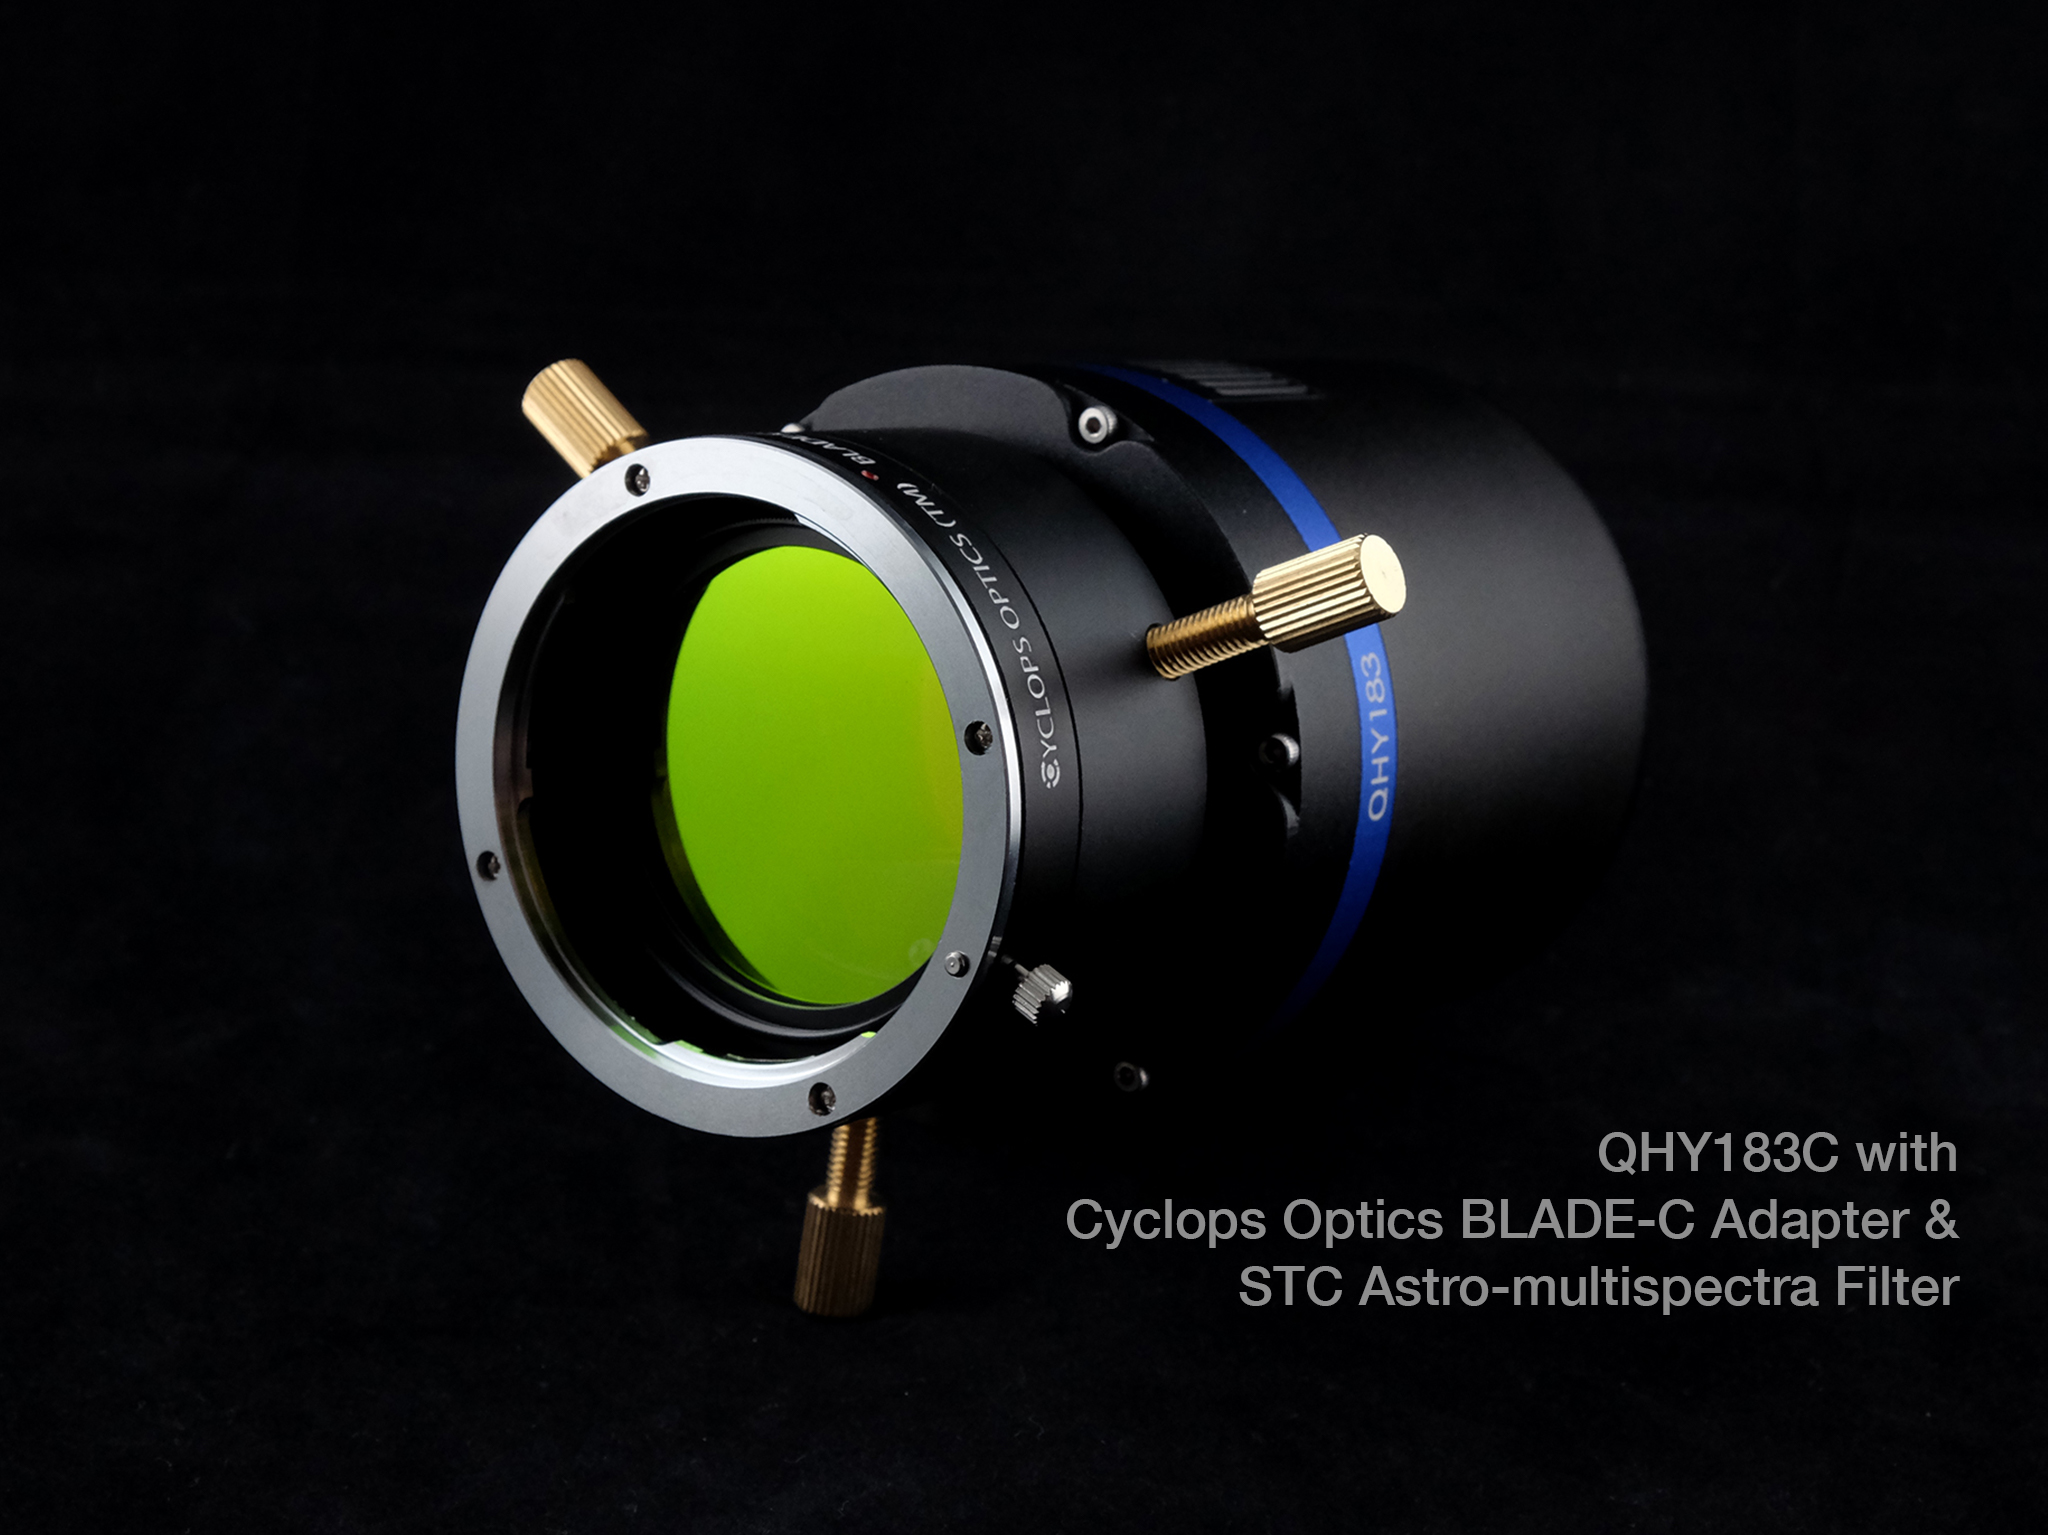 qhy183c-blade-c-adapter-with-stc-astro-multispectra-caption.jpg